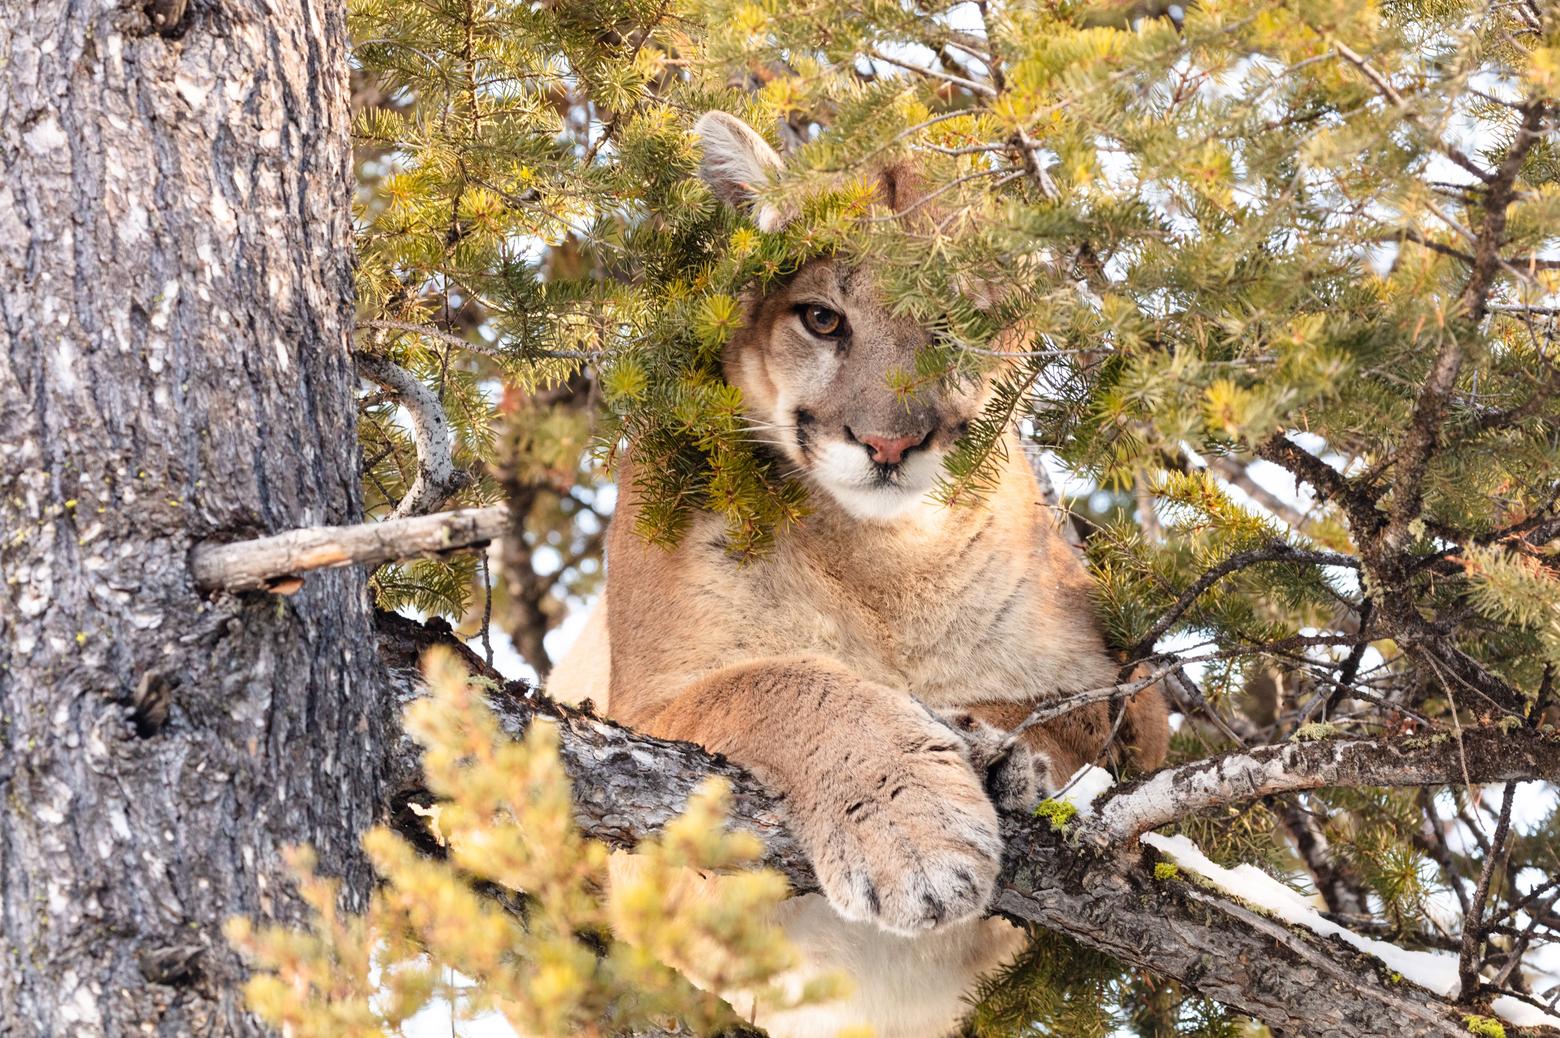 One of the lions that is part of an ongoing research project headed by Yellowstone biologist Dan Stahler.  Yellowstone's scientific studies of lions, wolves and grizzly bears are world-renowned.  Photo by Jacob W. Frank/NPS